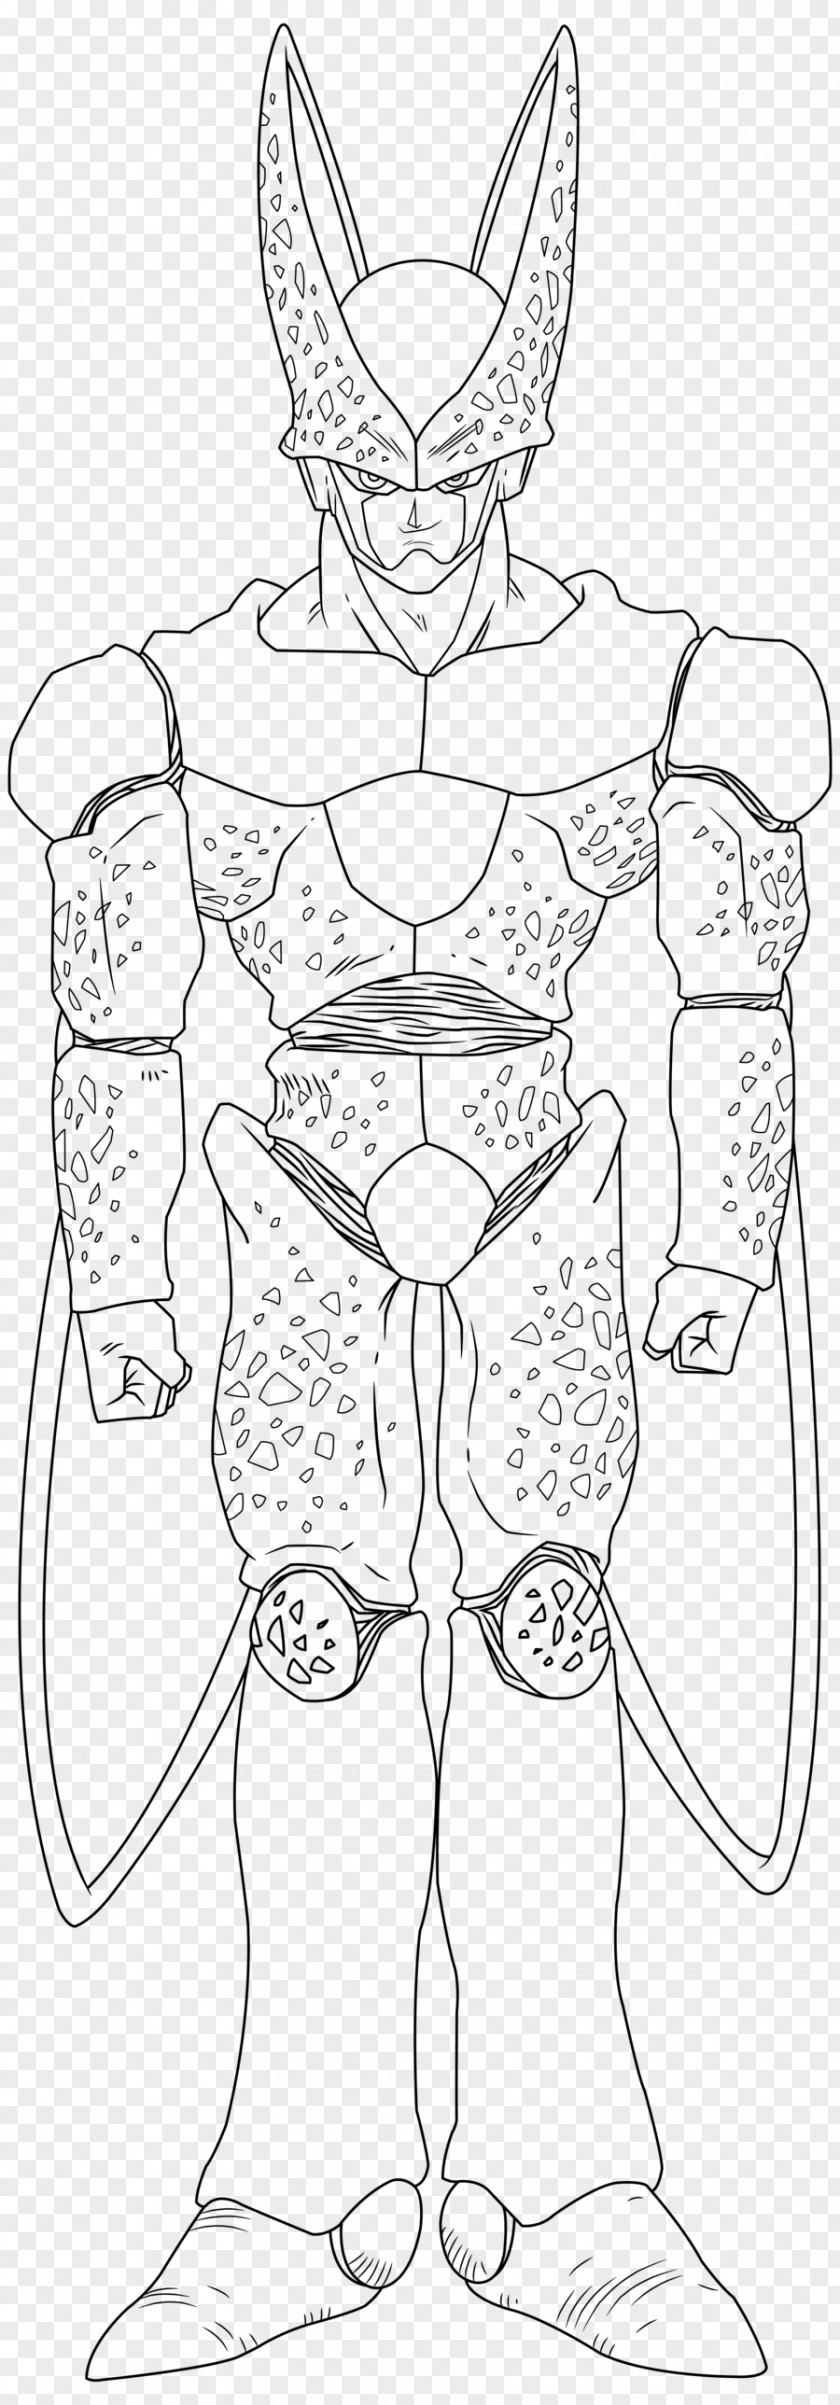 David And Goliath Line Art Drawing Cartoon Cell Frieza PNG